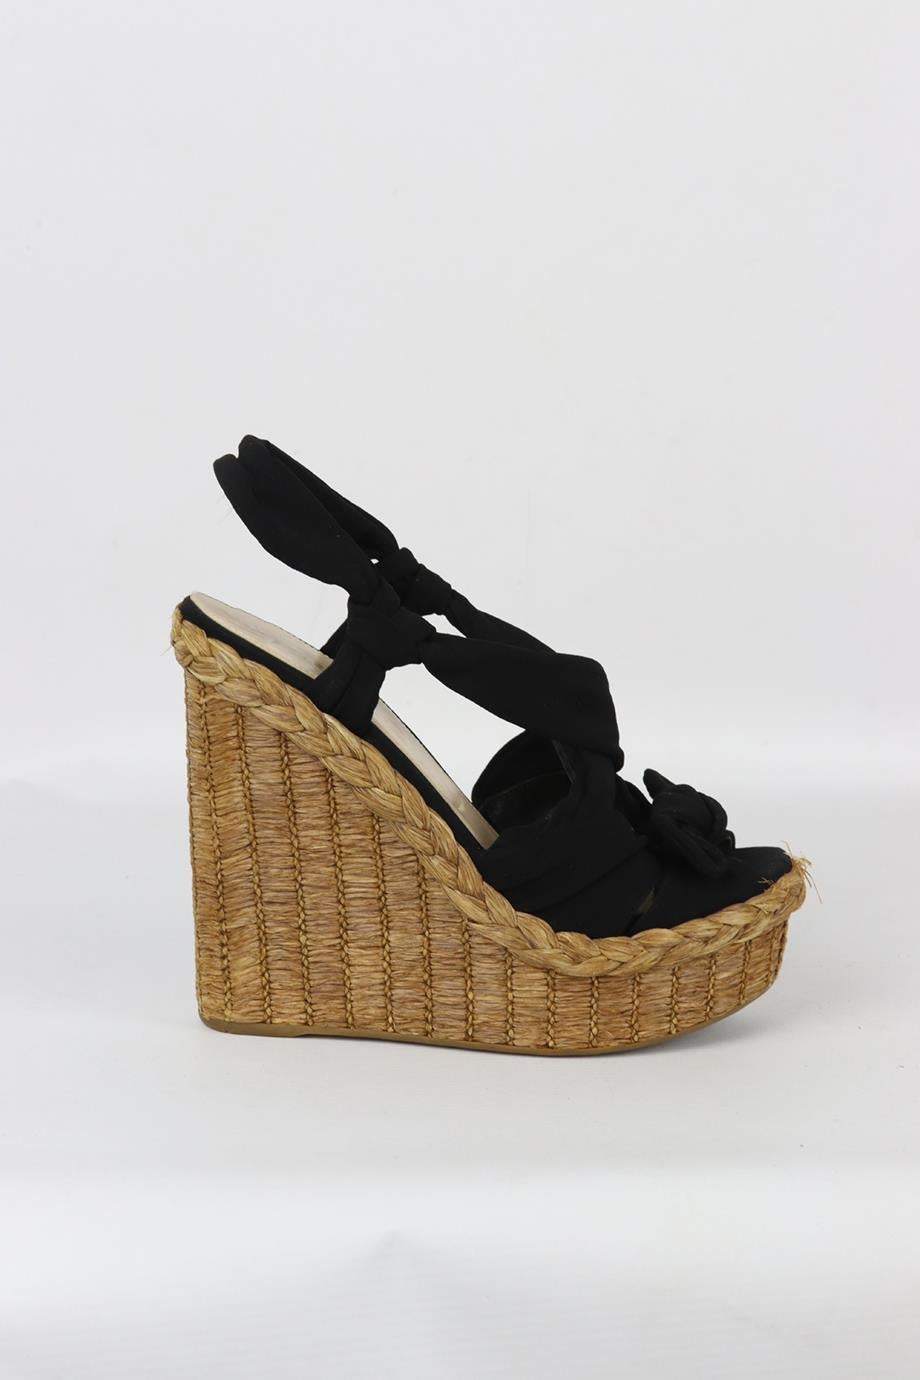 Prada satin and raffia espadrille wedge sandals. Black. Pull on. Does not come with dustbag or box. Size: EU 38 (UK 5, US 8). Insole: 9.5 in. Heel Height: 5.6 in. Platform: 1.6 in. Very good condition - Some wear to soles. Light wear to upper